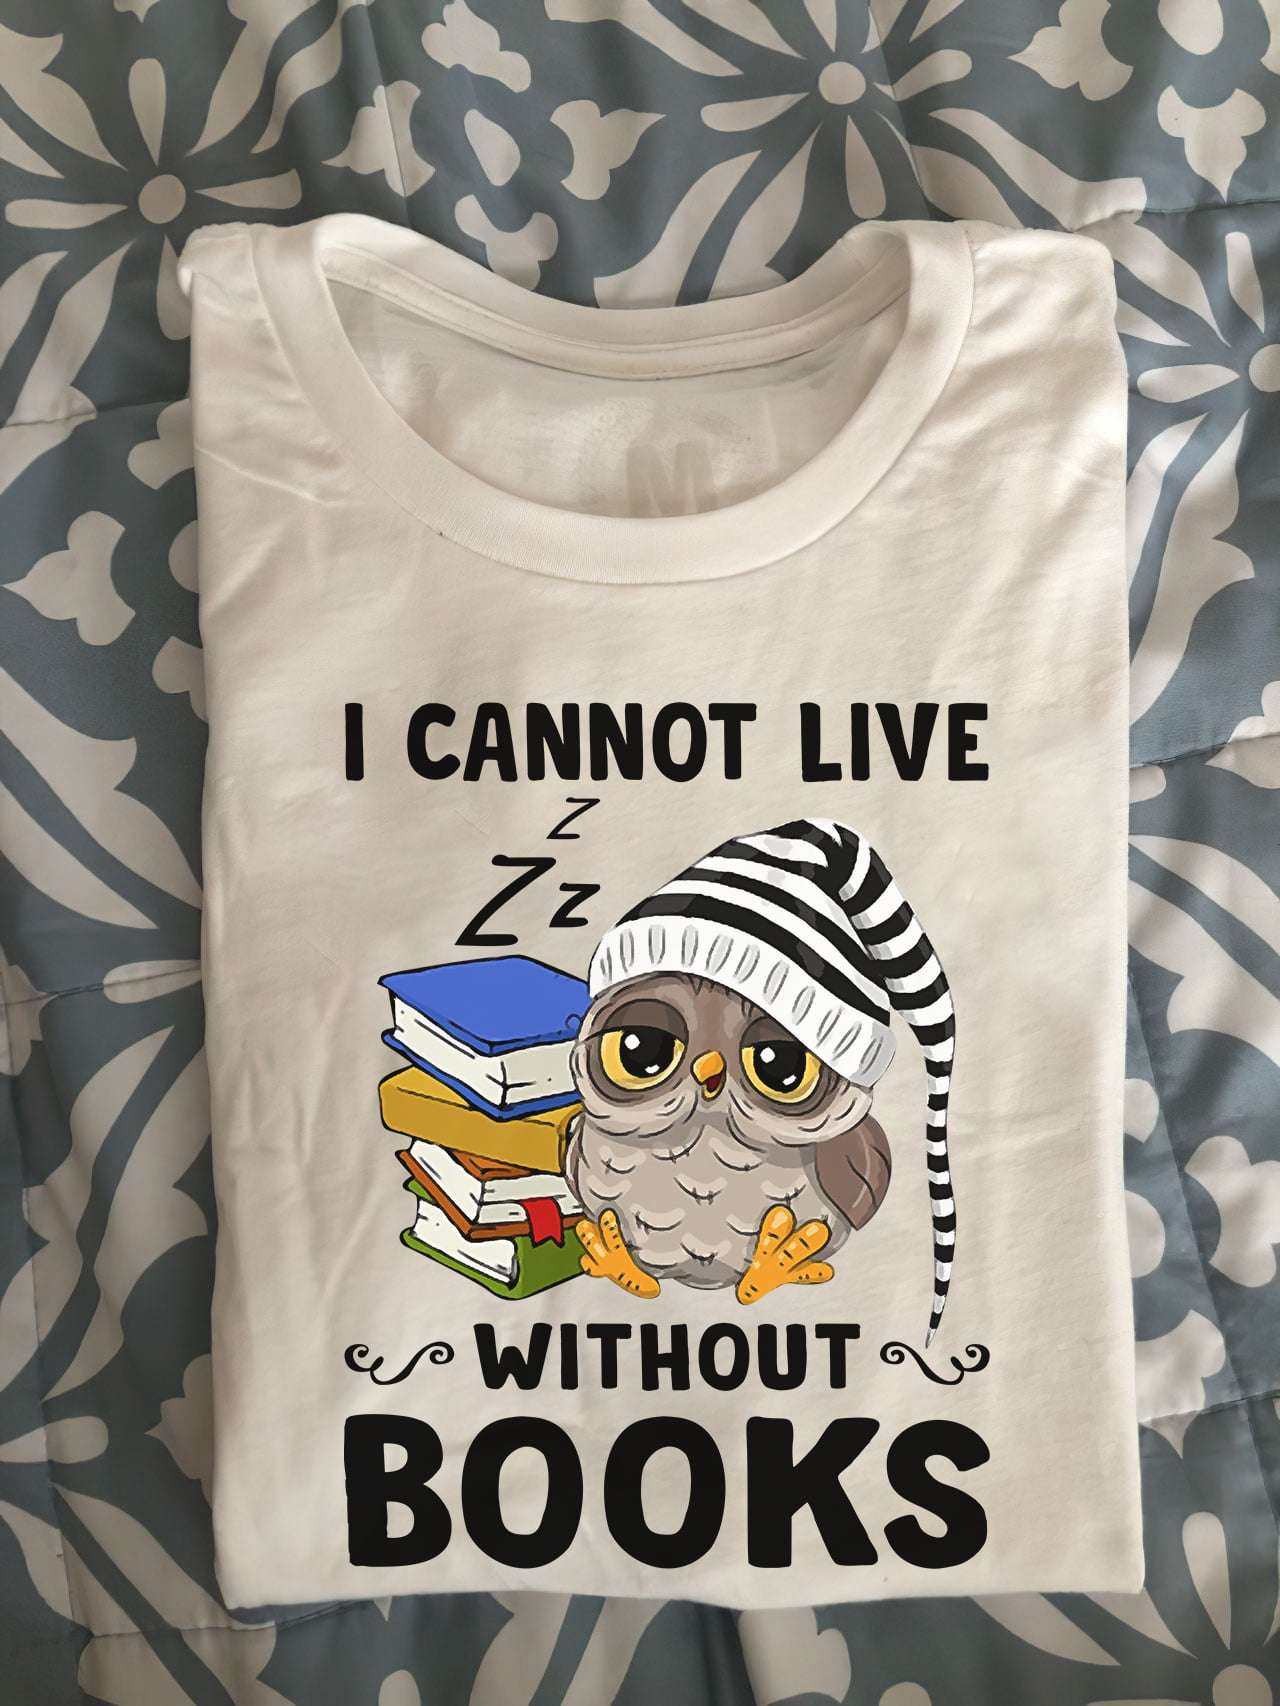 Owl Love Book - I cannot live without books